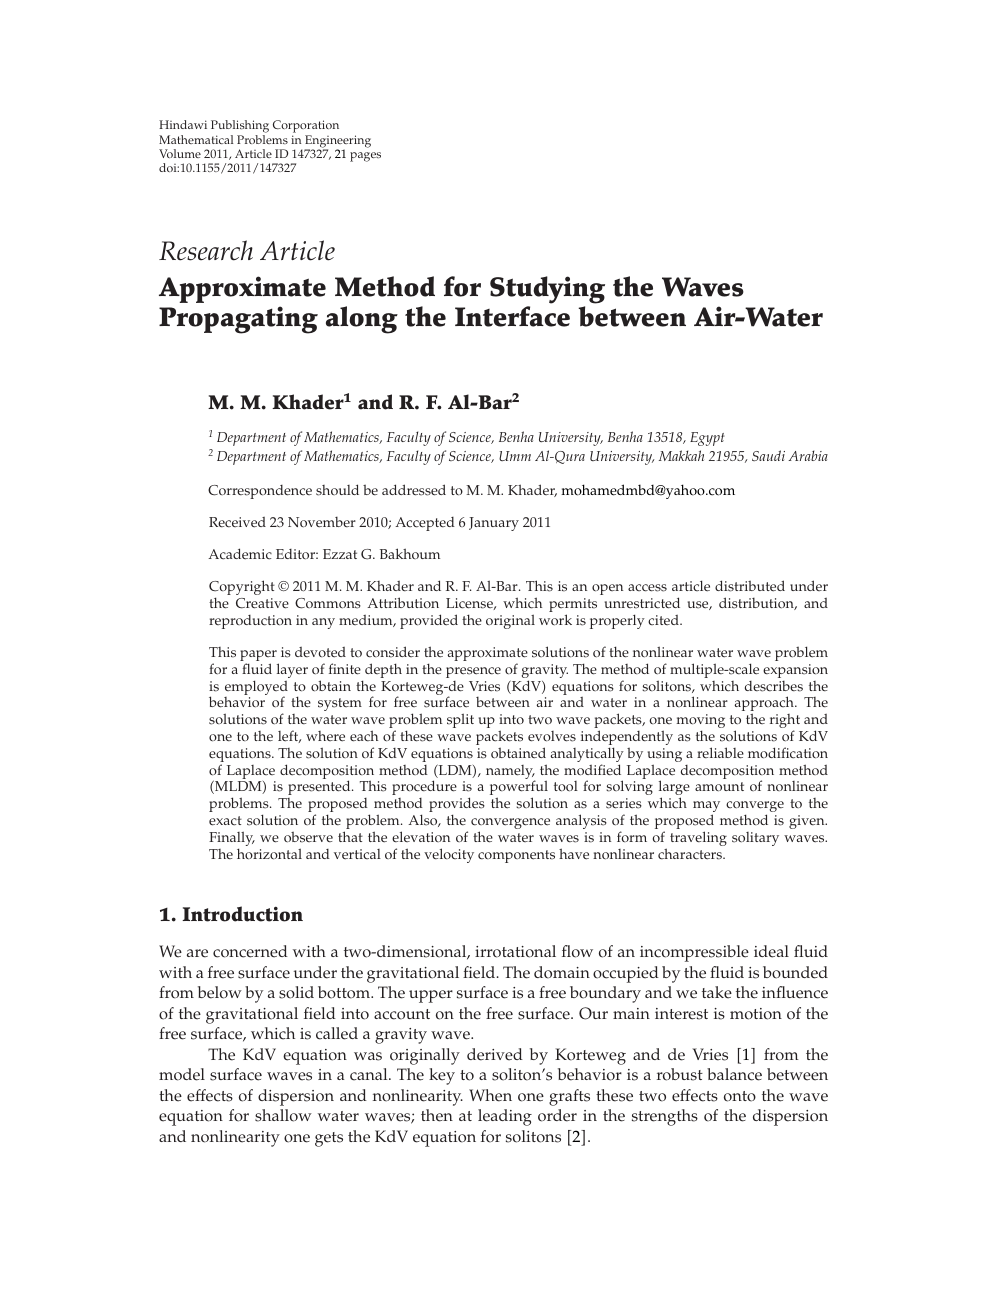 Approximate Method For Studying The Waves Propagating Along The Interface Between Air Water Topic Of Research Paper In Mathematics Download Scholarly Article Pdf And Read For Free On Cyberleninka Open Science Hub